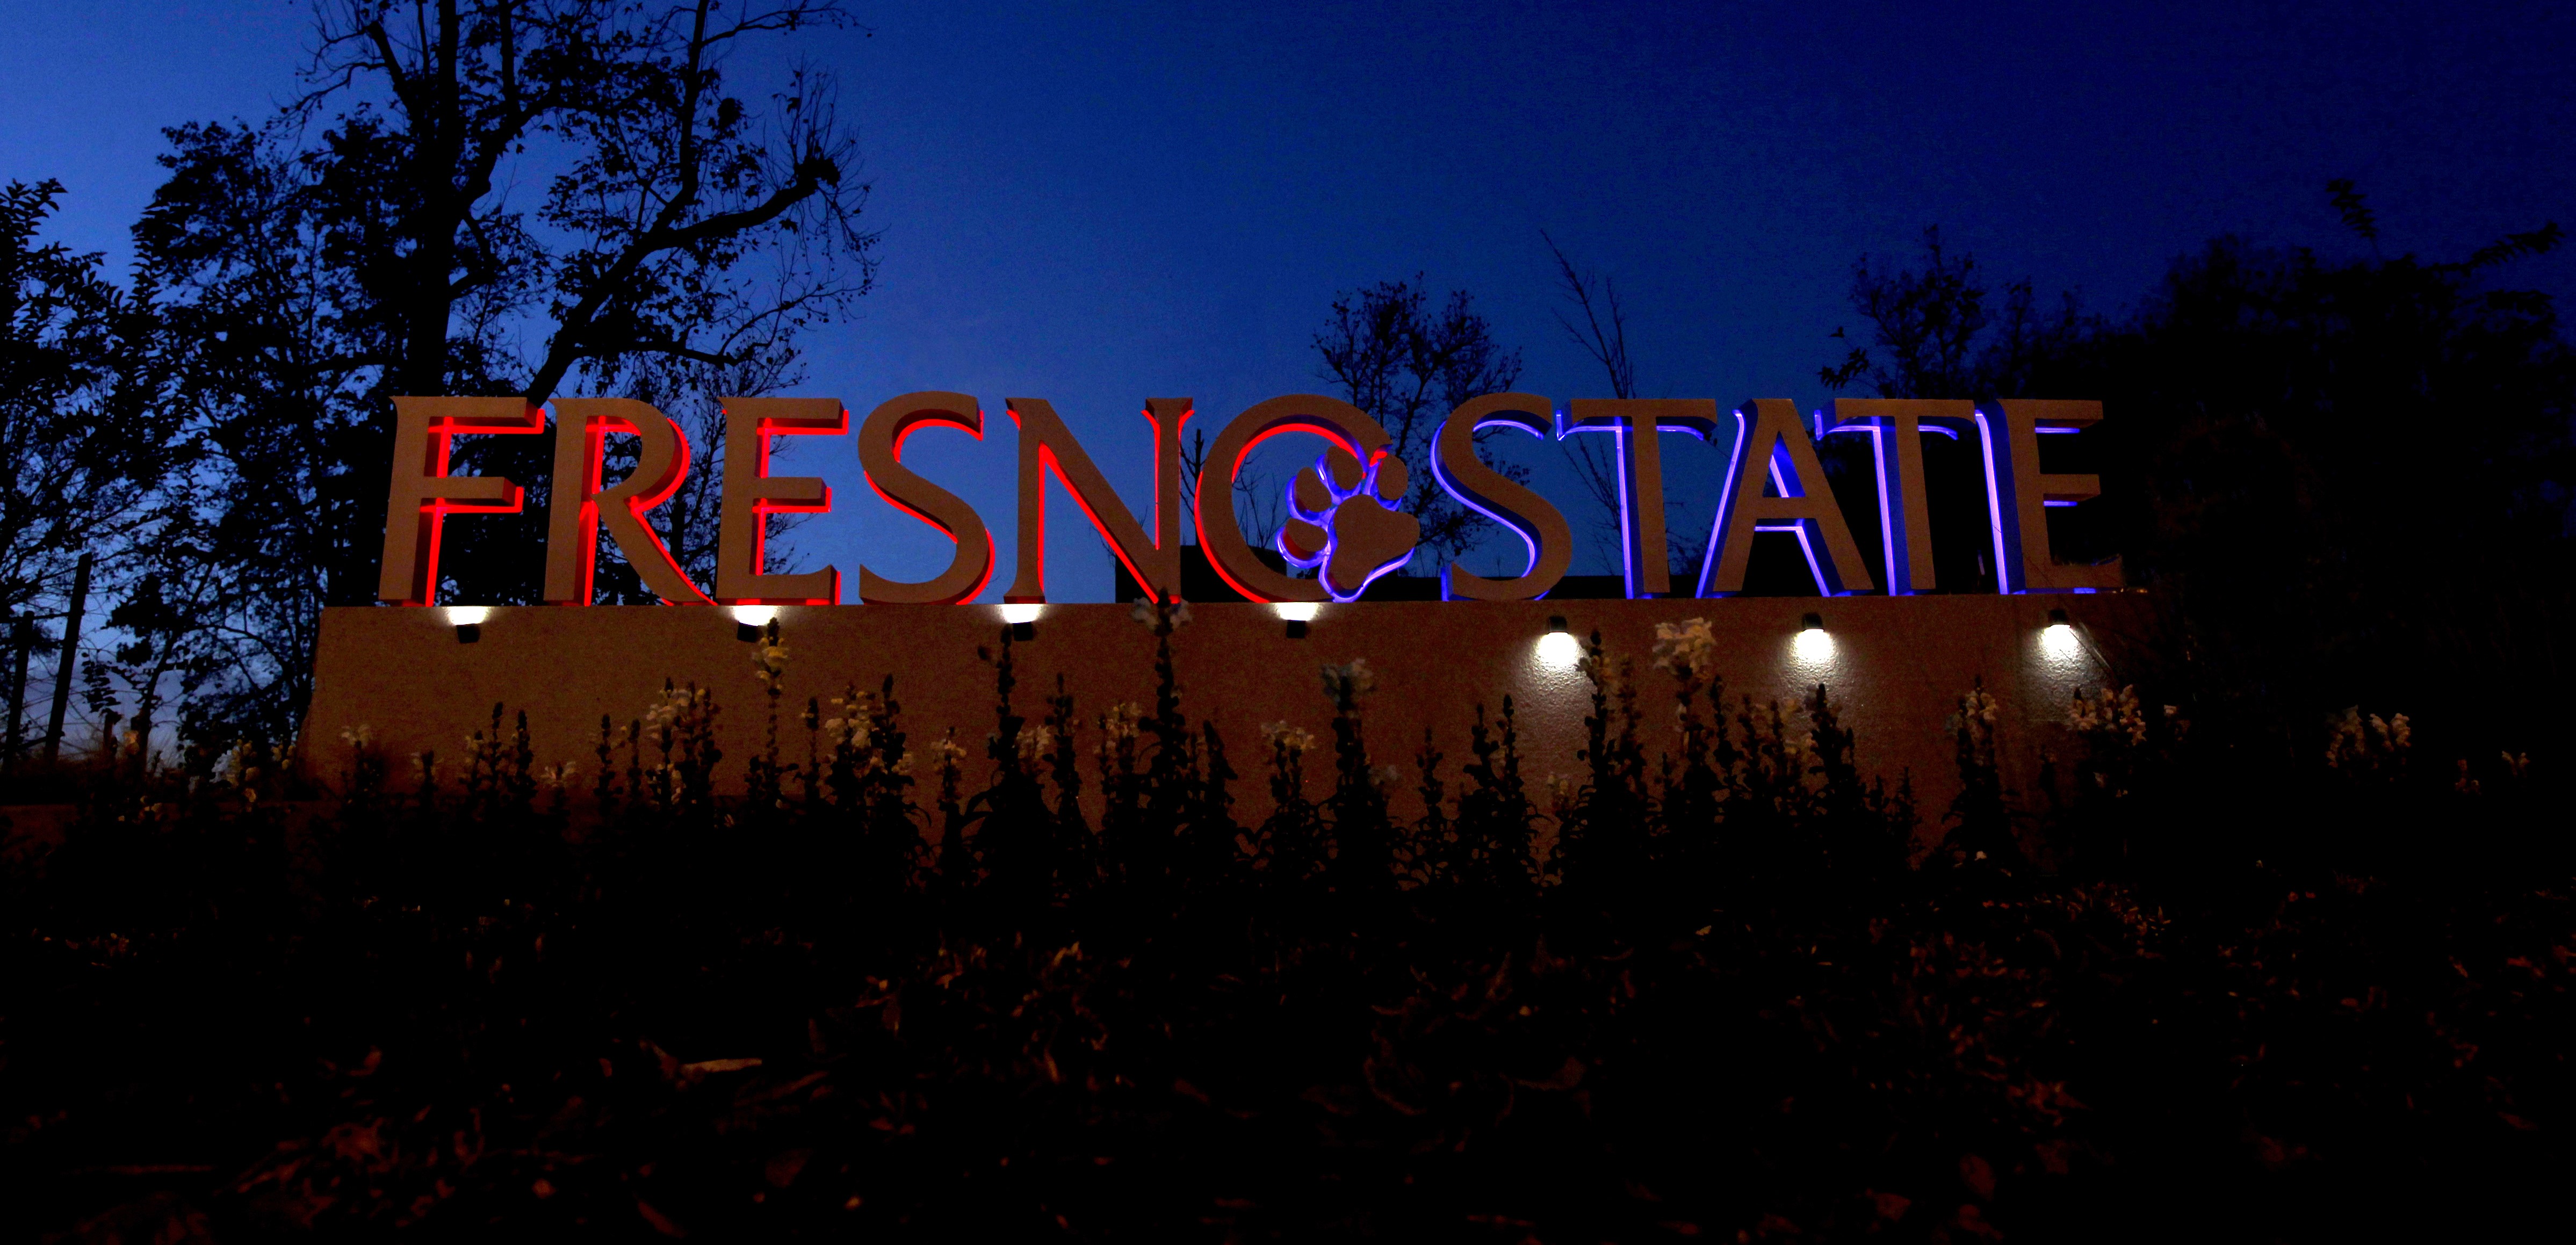 Cover Photo of Fresno State Campus Sign